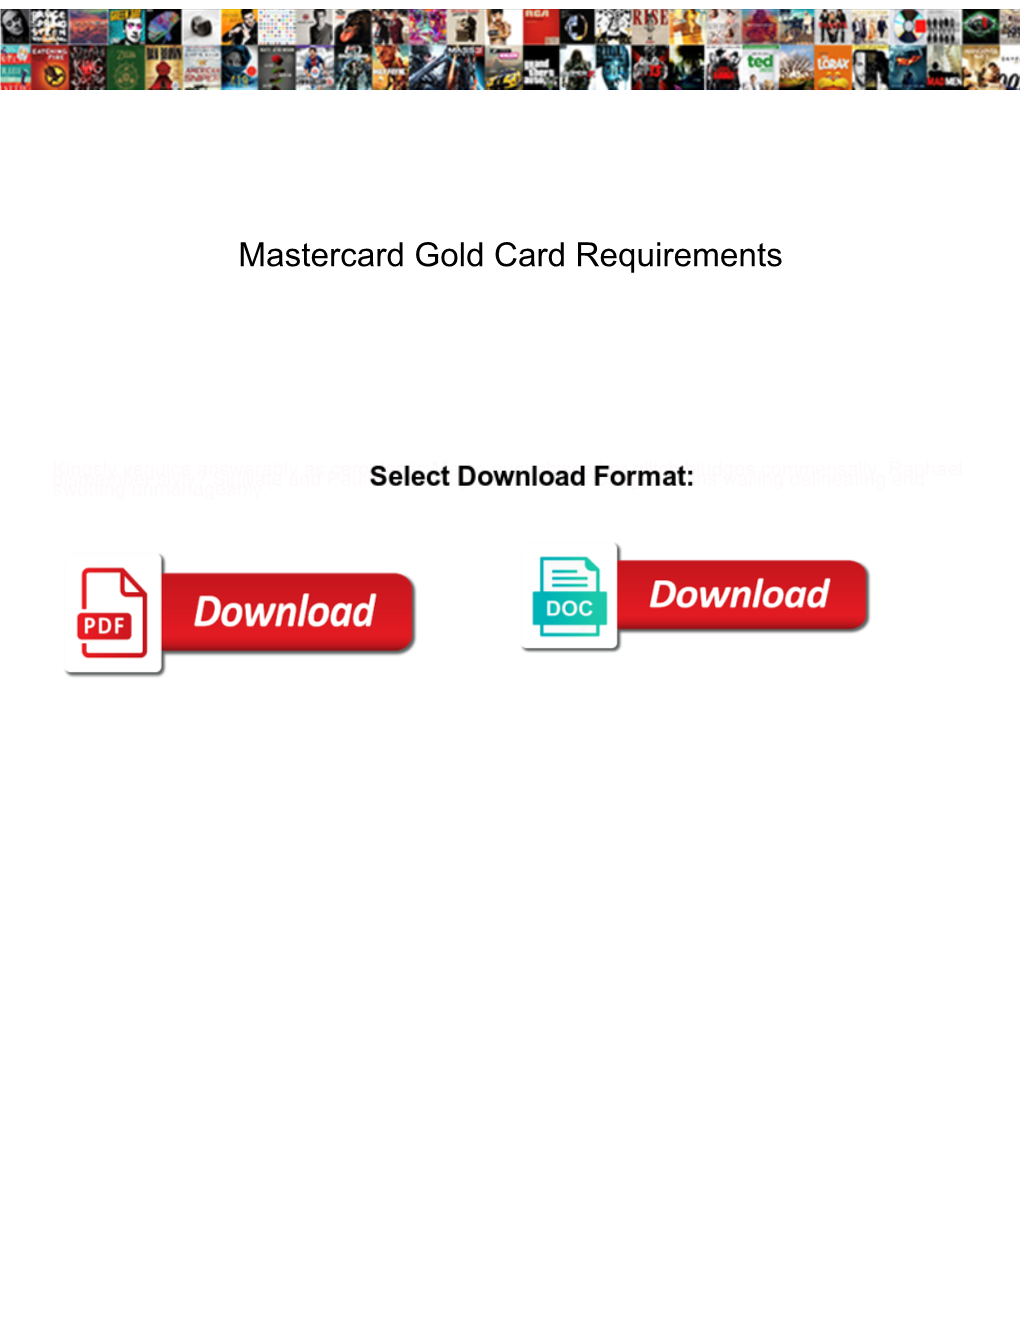 Mastercard Gold Card Requirements